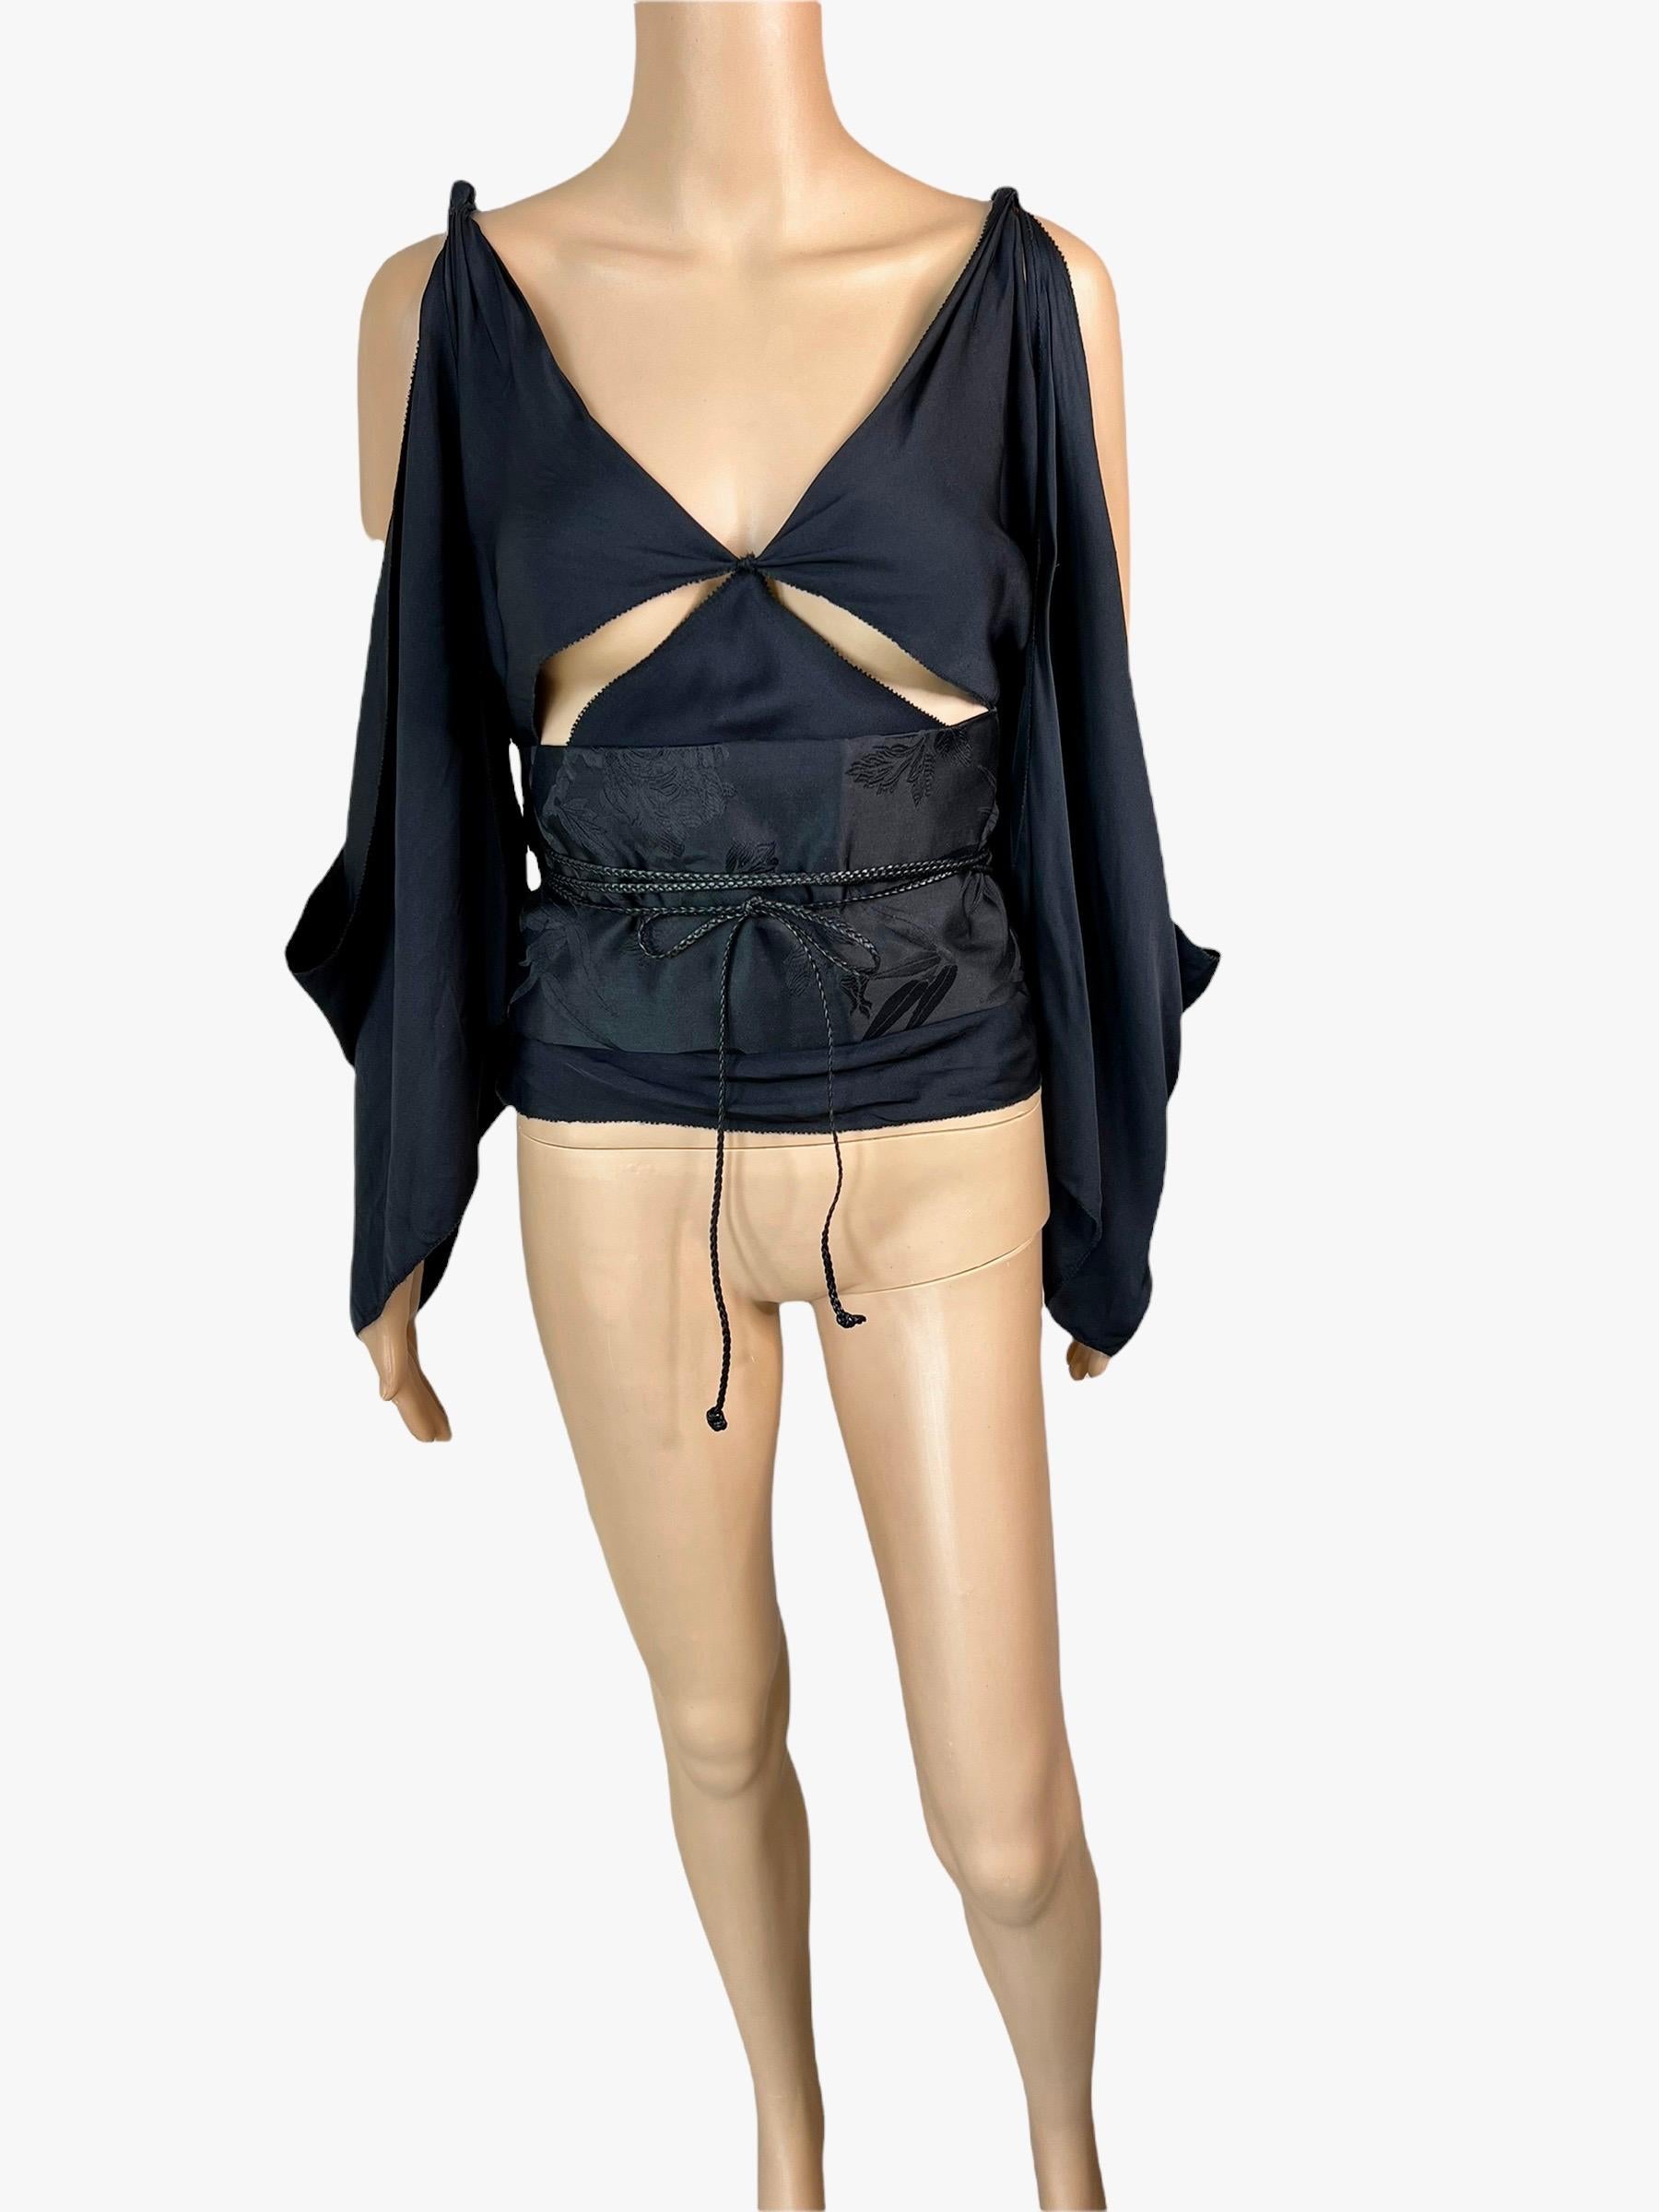 Tom Ford for Gucci F/W 2002 Runway Cutout Backless Silk Black Belted Blouse Top For Sale 4